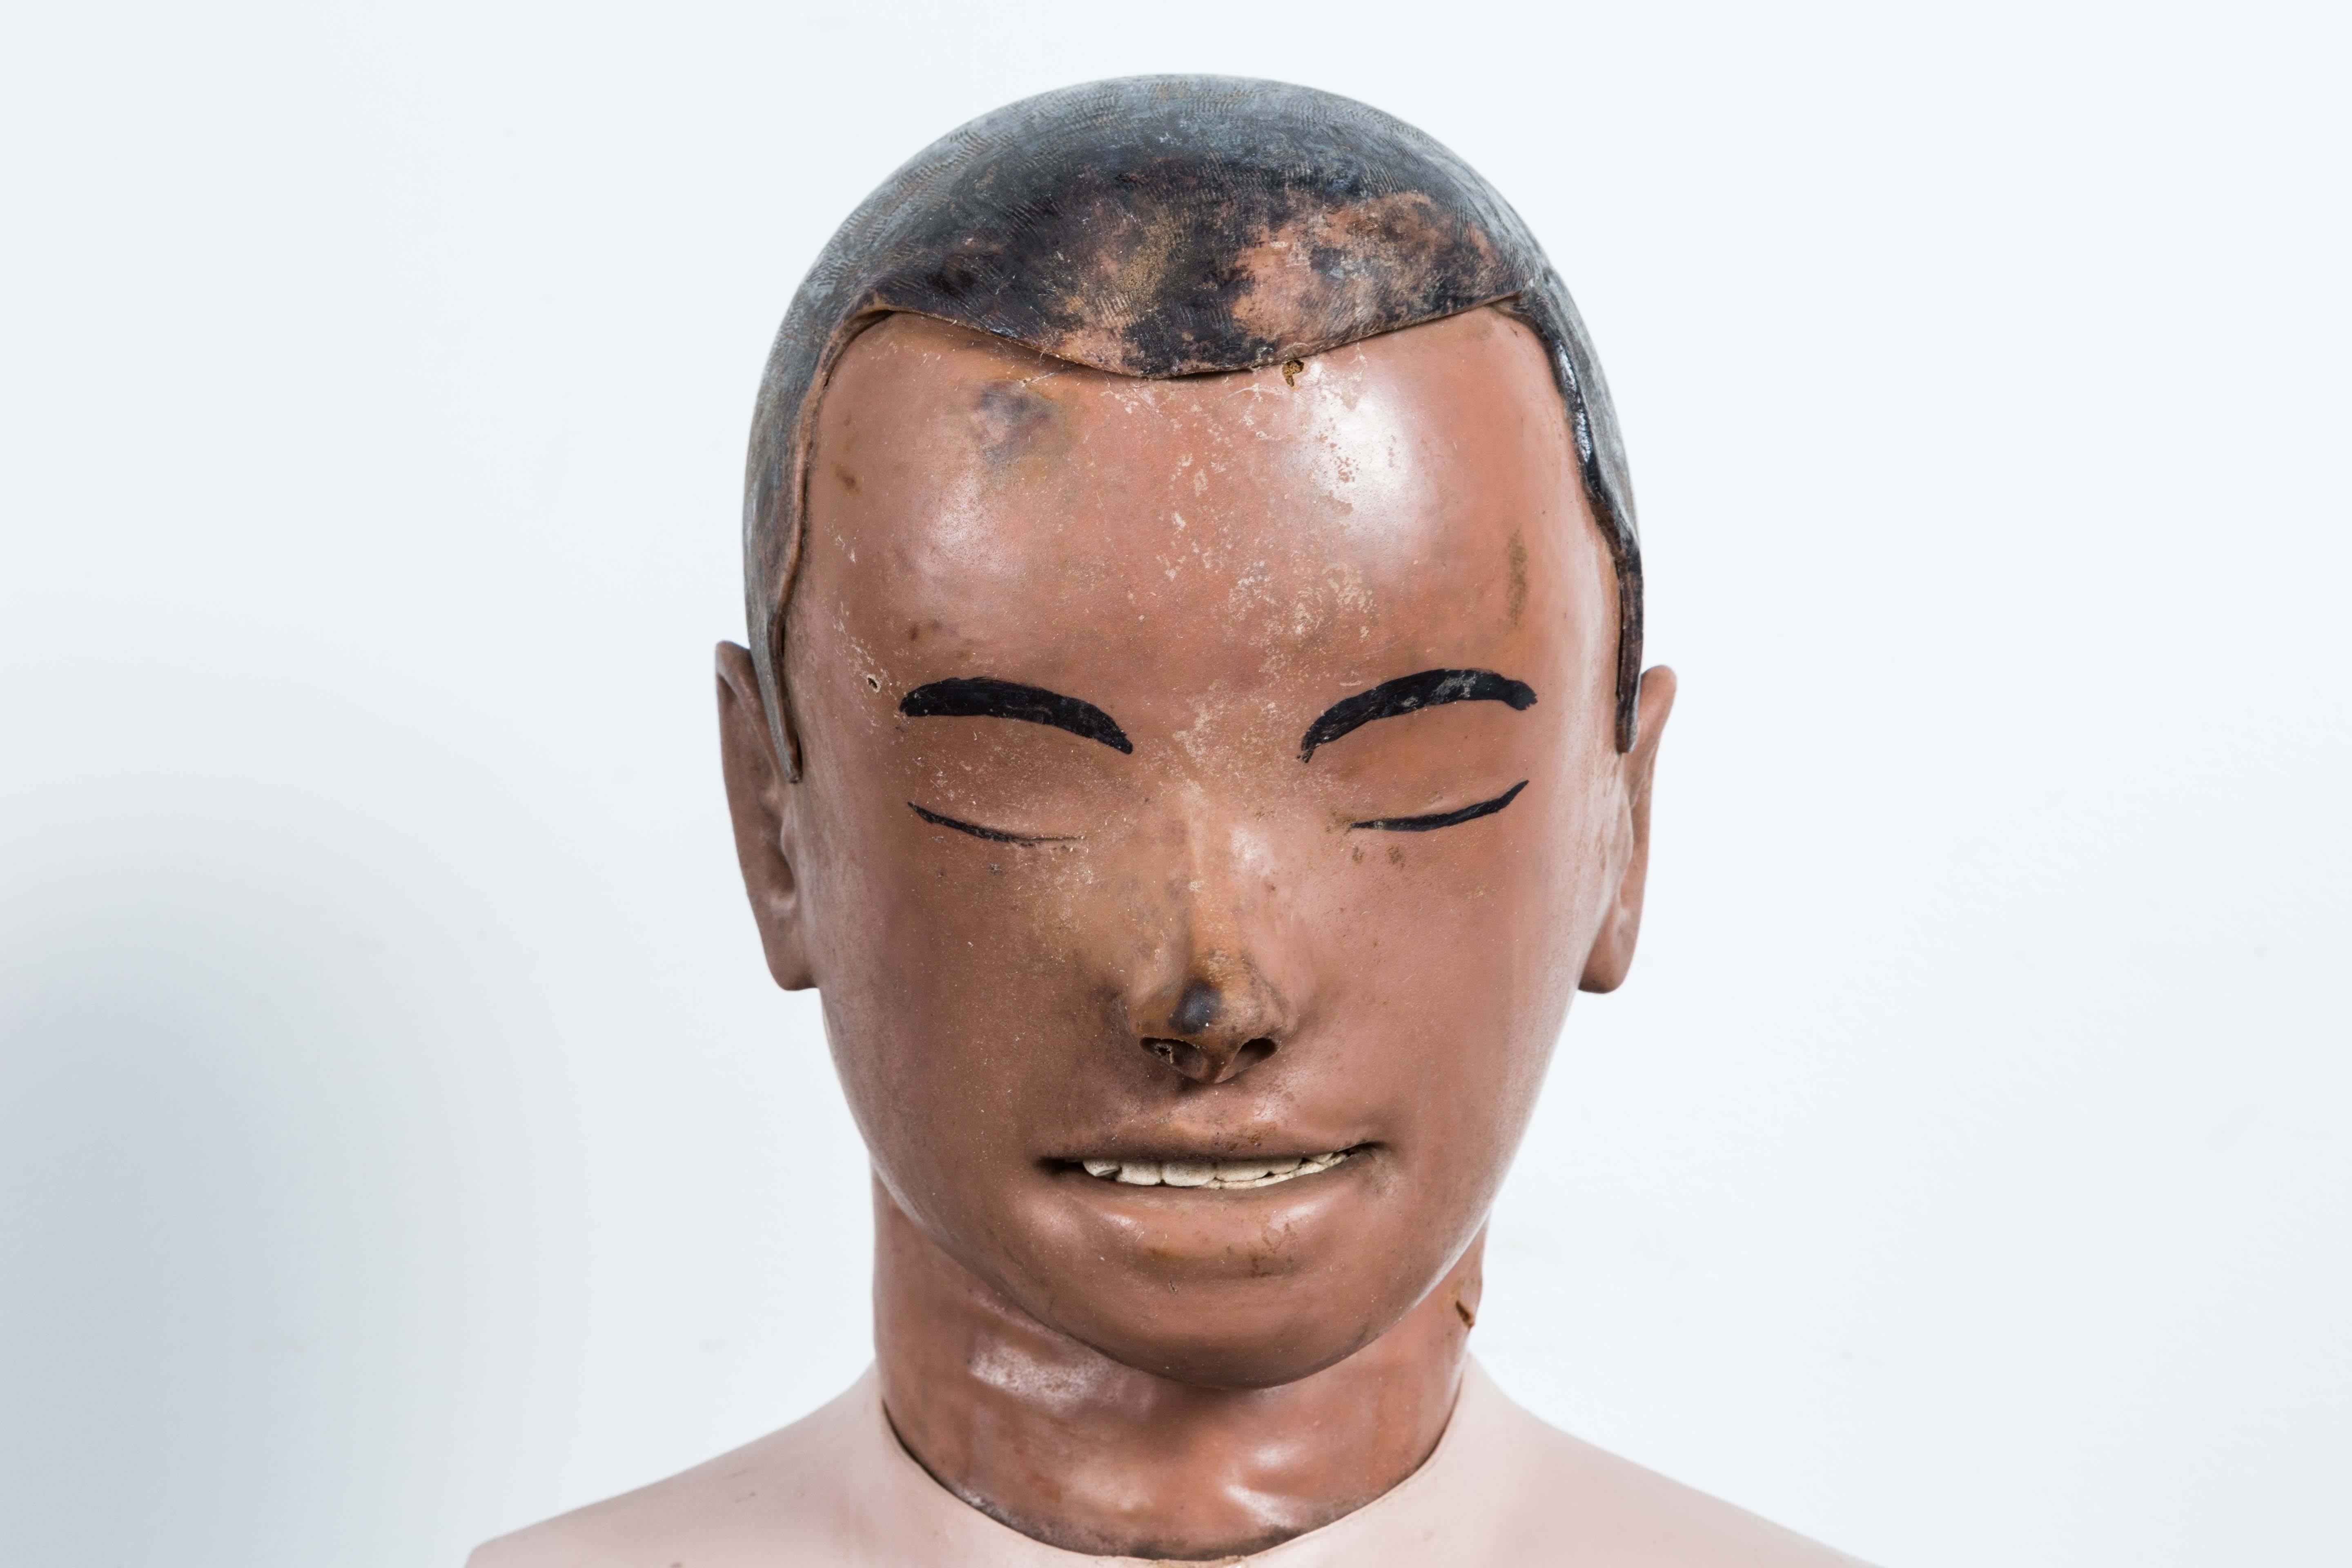 Vintage resuscitation man's head. Open mouth connected to tubes that would raise chest for CPR training. Resuscitation dummies were invented in the 1950s by Asmund Laerdal. Laerdal has a life-long devotion to innovative medical simulation and